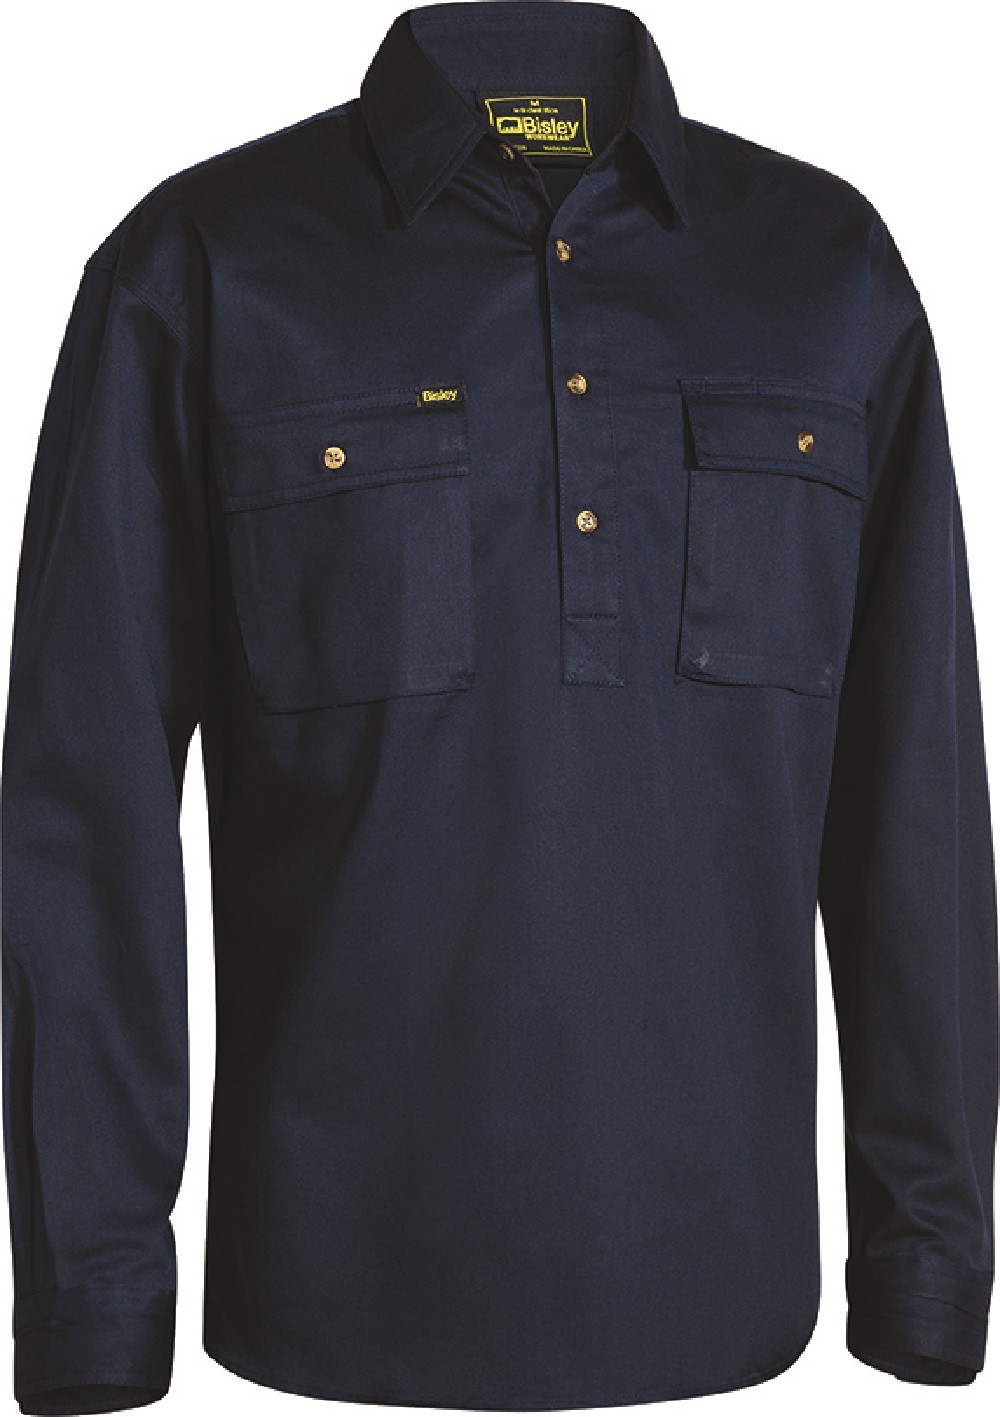 SHIRT L/S CLOSED FRONT NAVY 2XL 190gsm COTTON DRILL